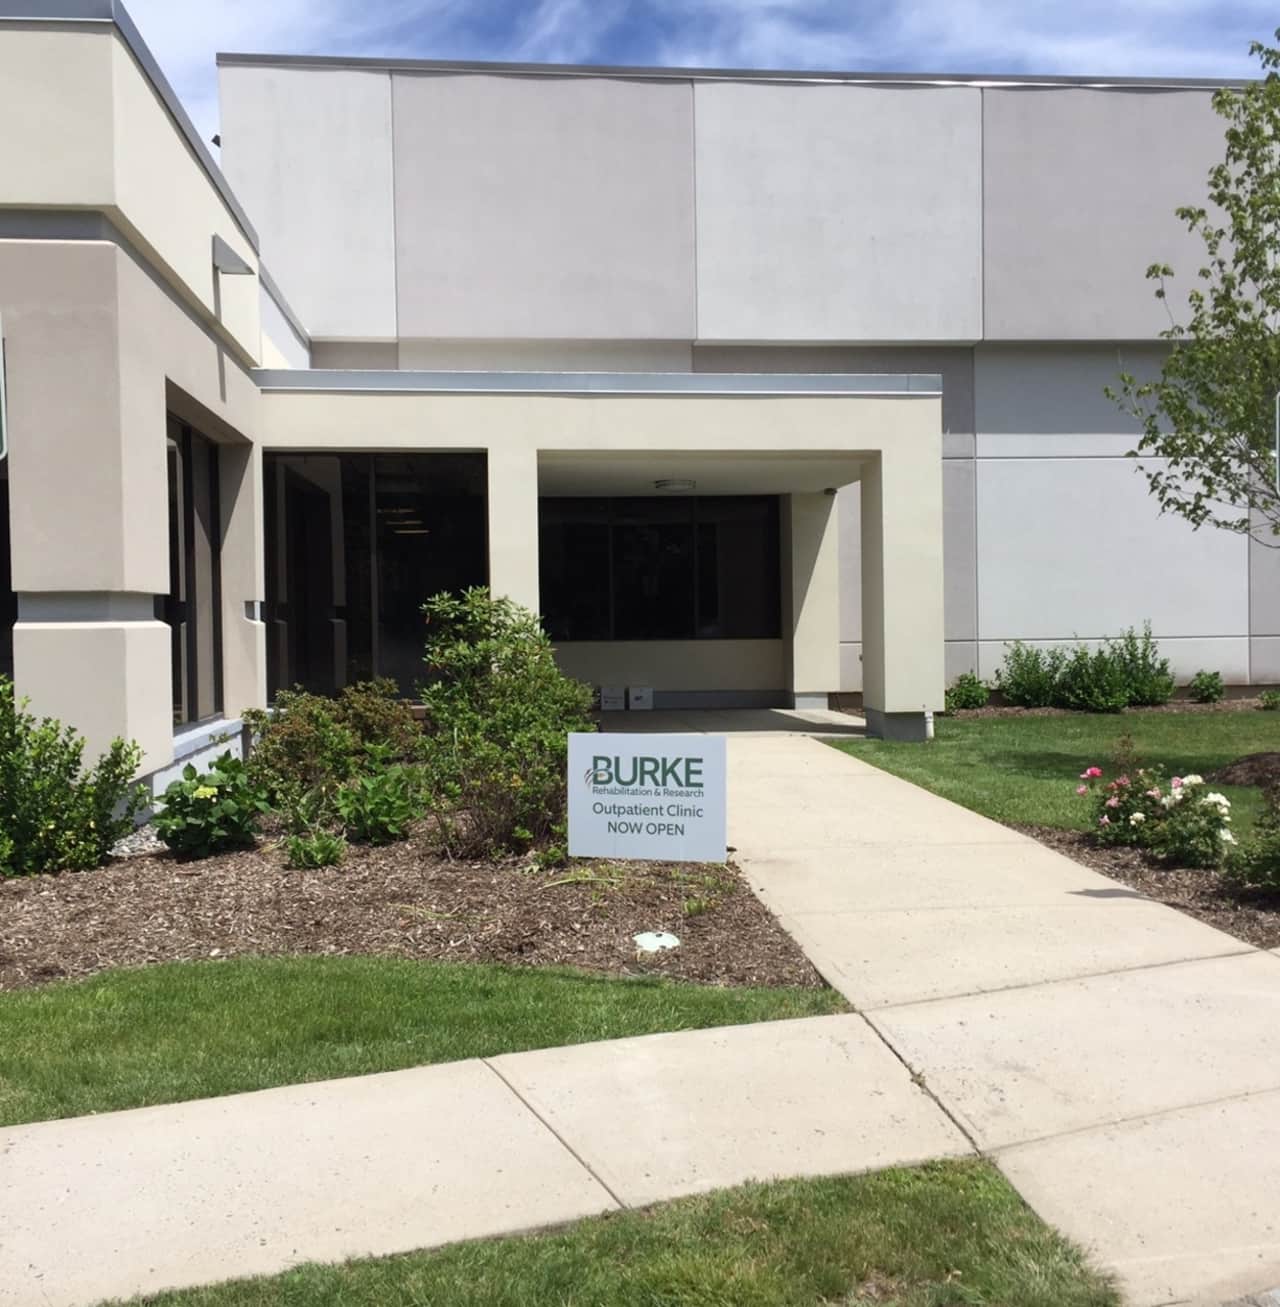 White Plains-based Burke Rehabilitation Hospital has opened a new new outpatient clinic at 99 Business Park Drive in Armonk.